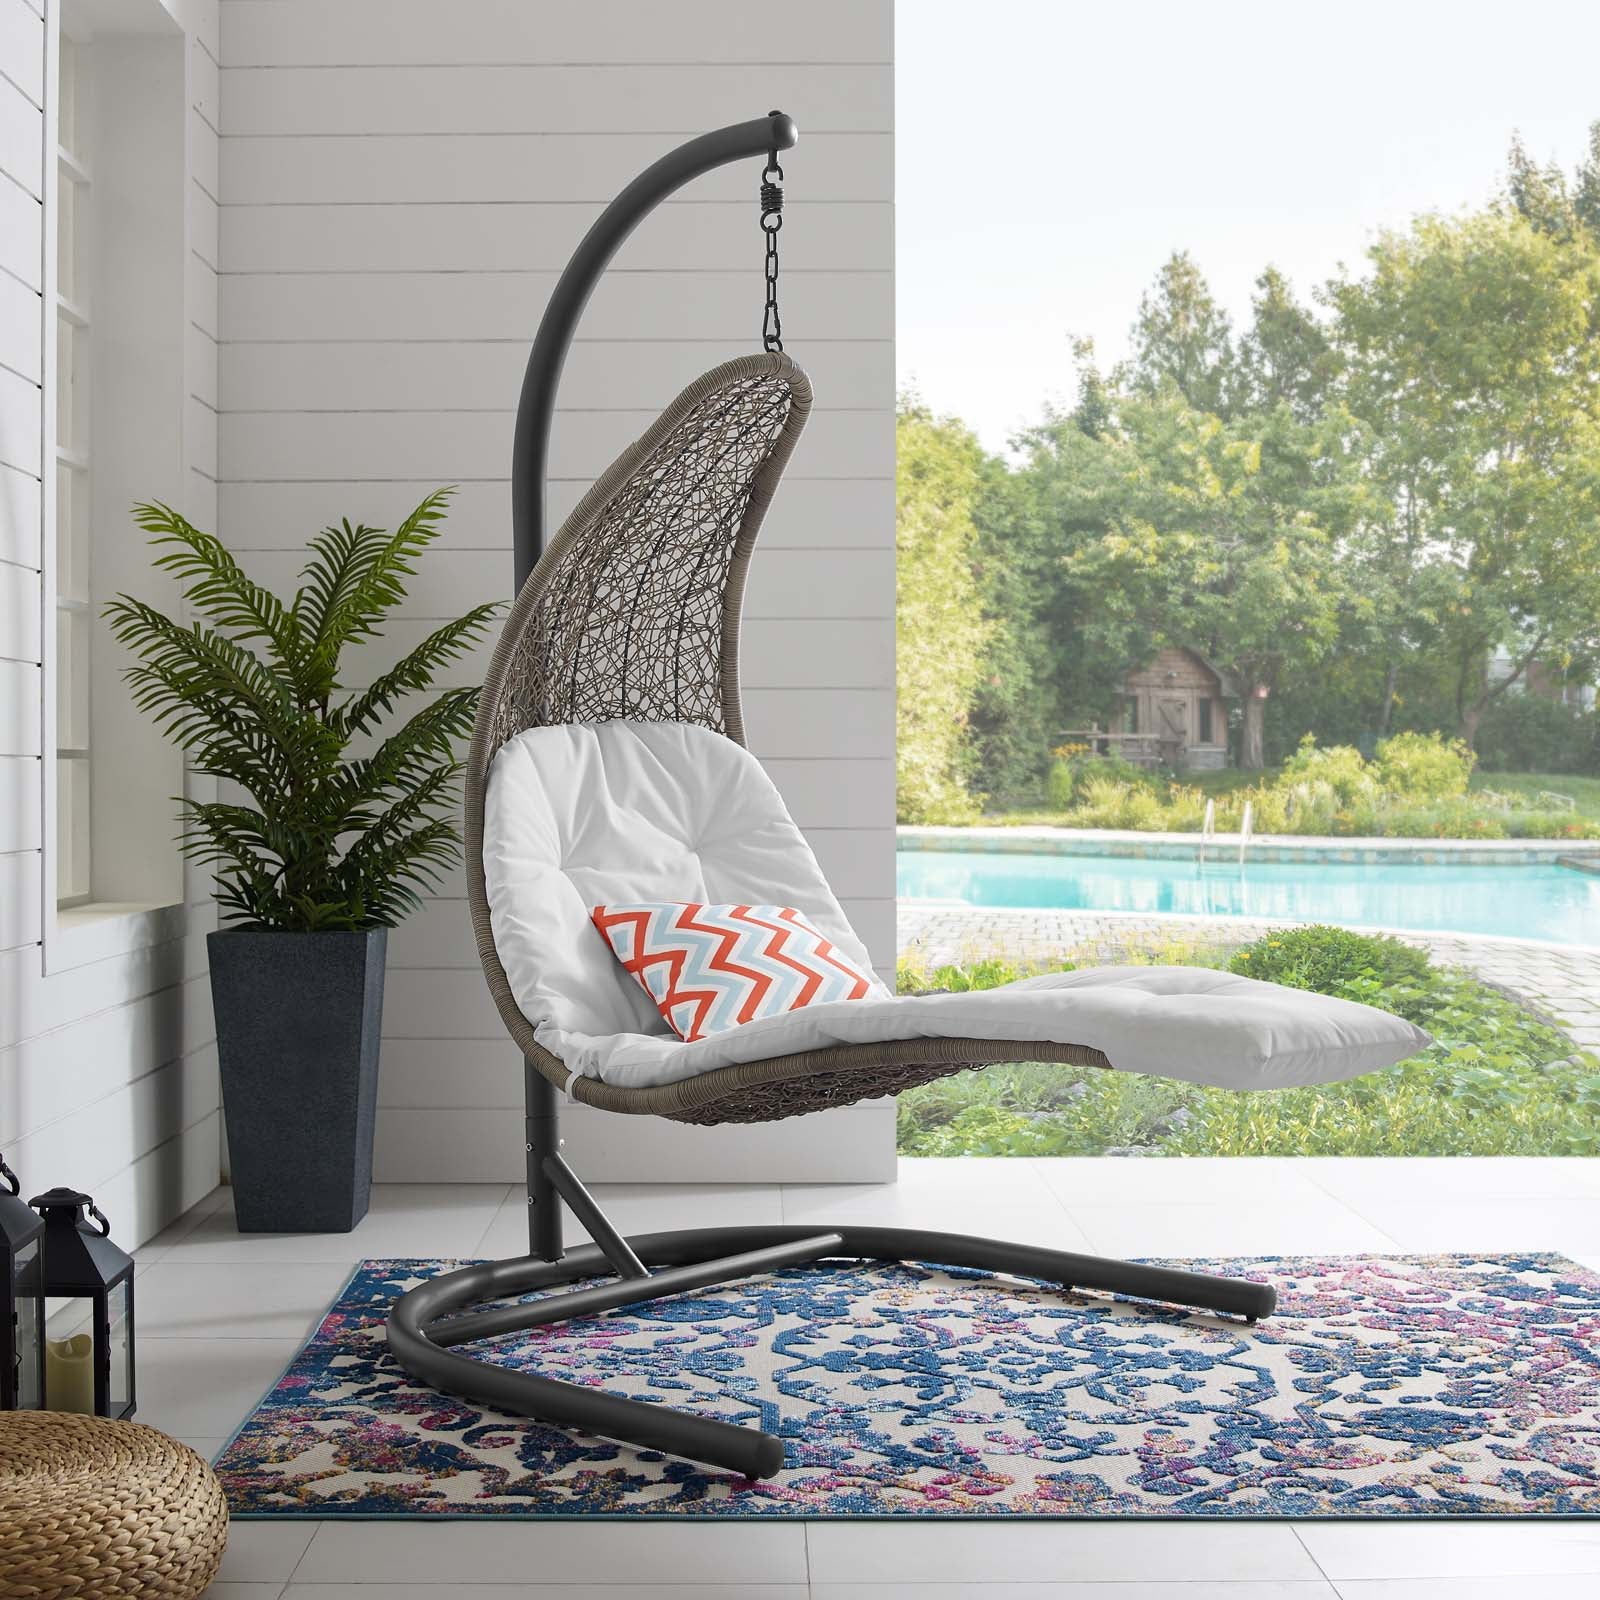 Modway Outdoor Swings - Landscape Hanging Chaise Lounge Outdoor Patio Swing Chair Light Gray White